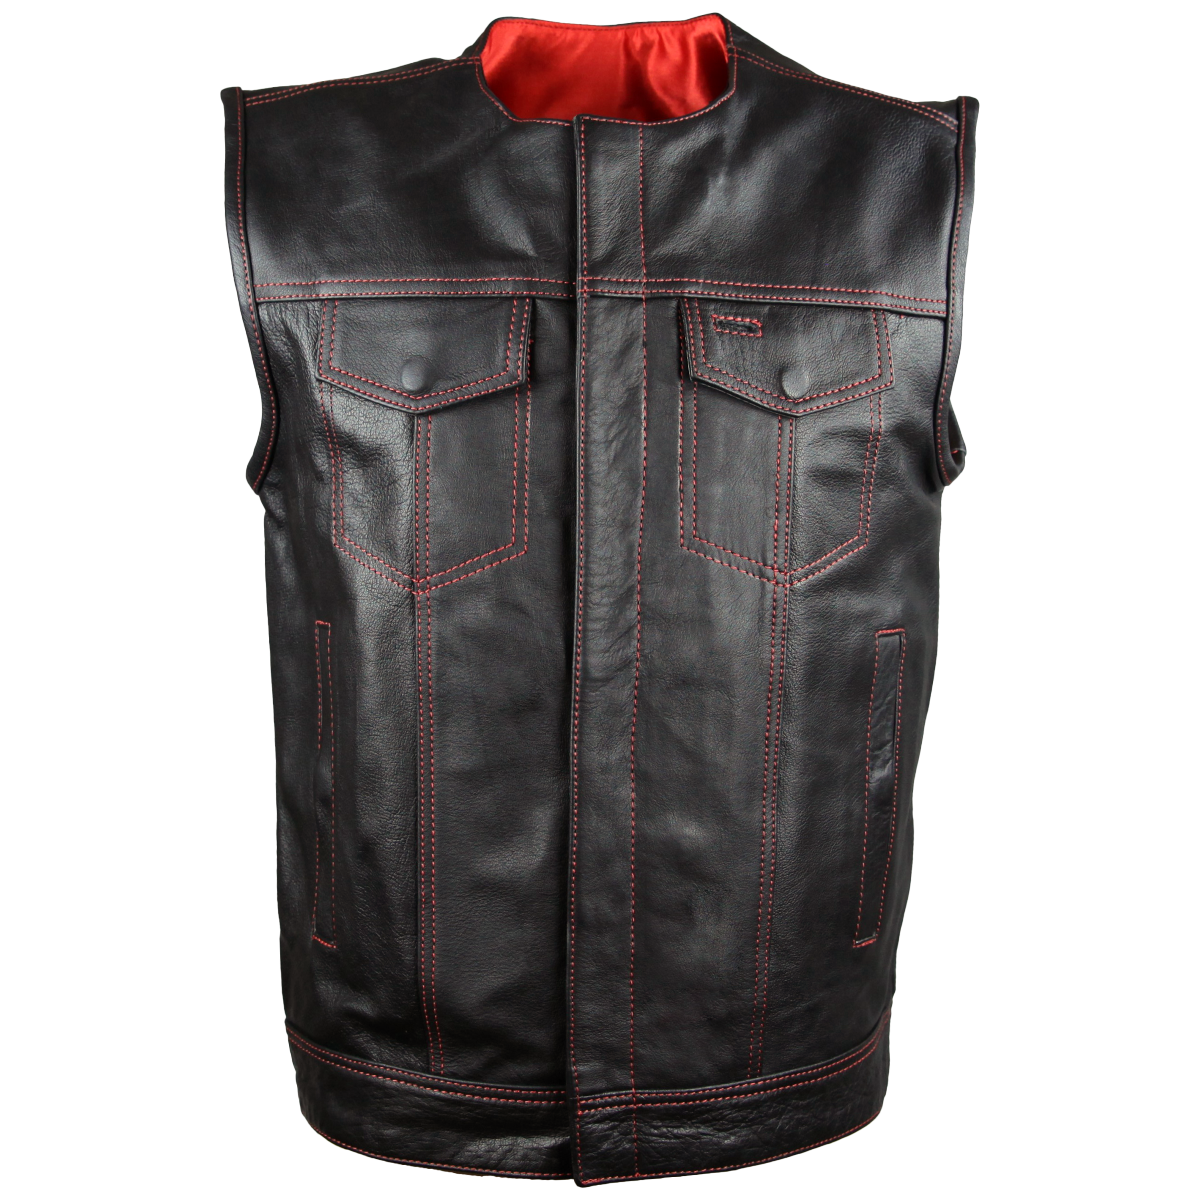 Vance Leather High Mileage Men's Zipper and Snap Closure Leather Club Vest Quick Access Gun Pocket w/Red Liner